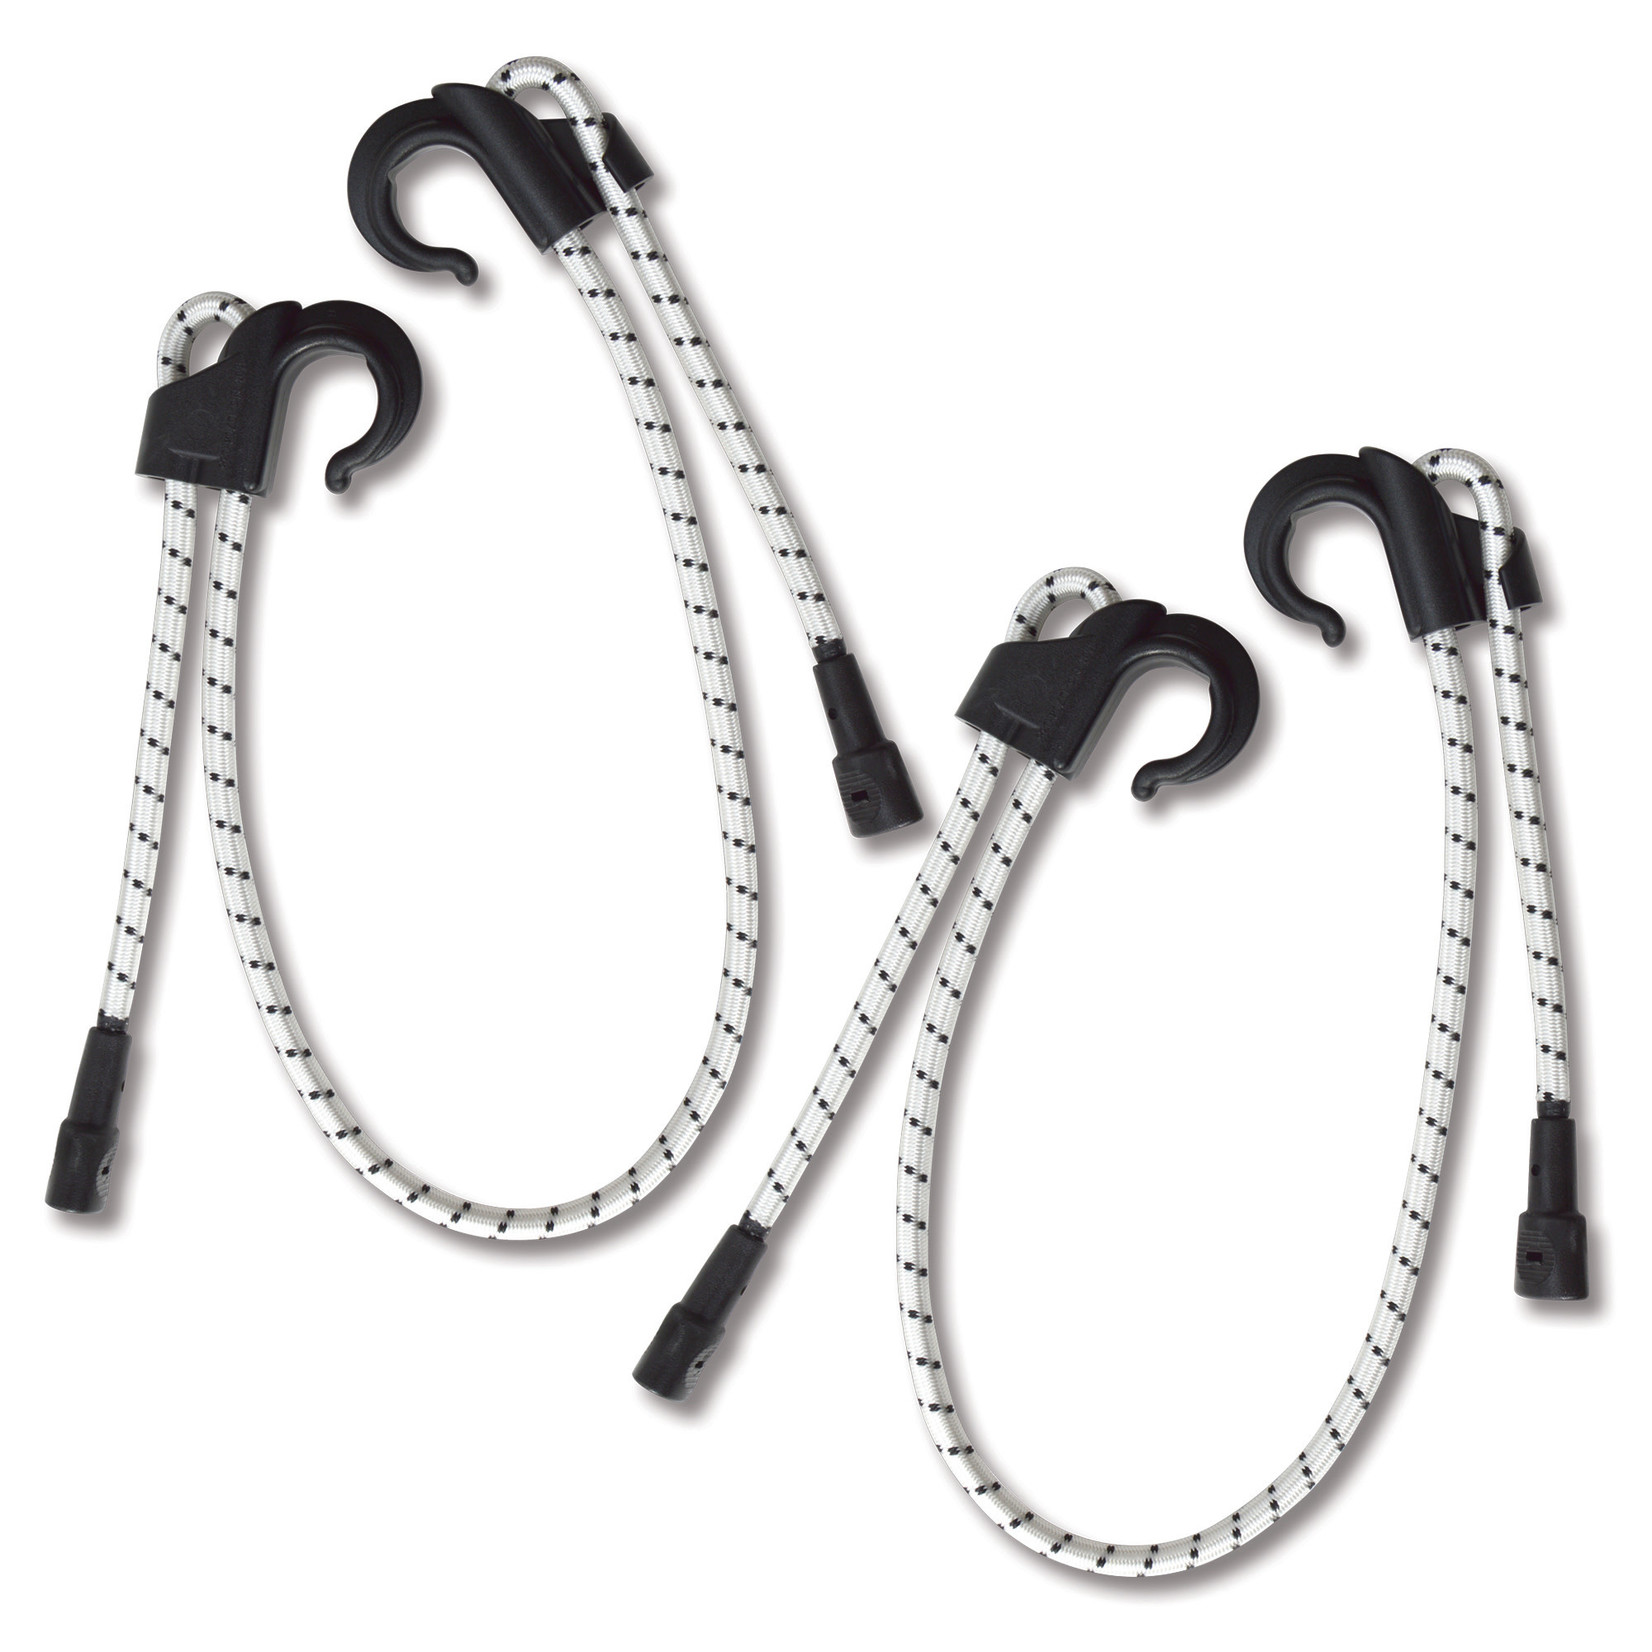 Monkey Fingers 8015439 60 x 0.37 in White Adjustable Bungee Cord 15 lbs - Pack of 2